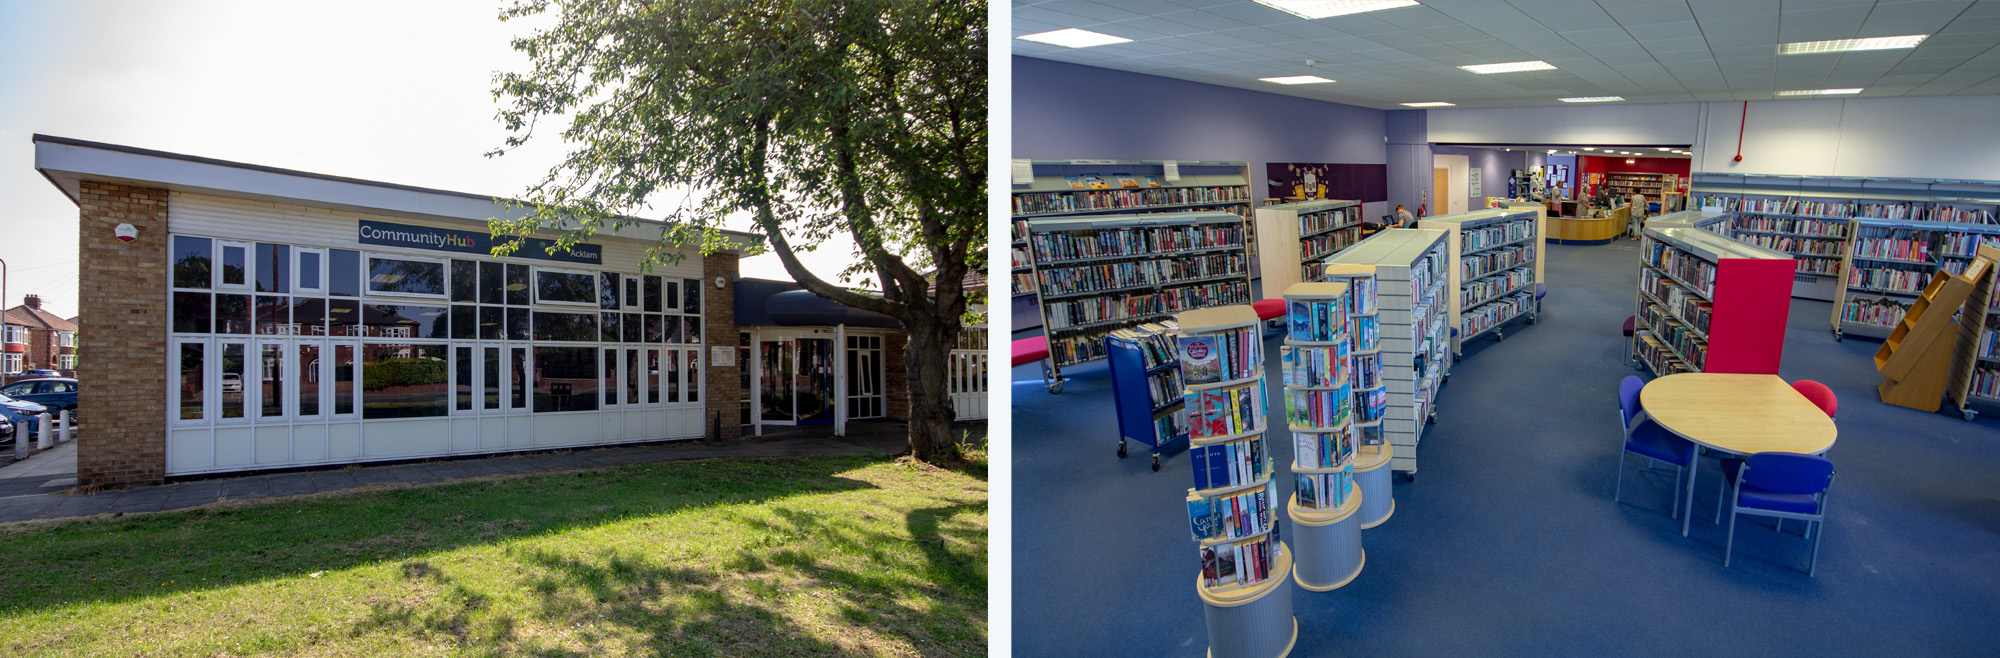 Acklam Community Hub and Library